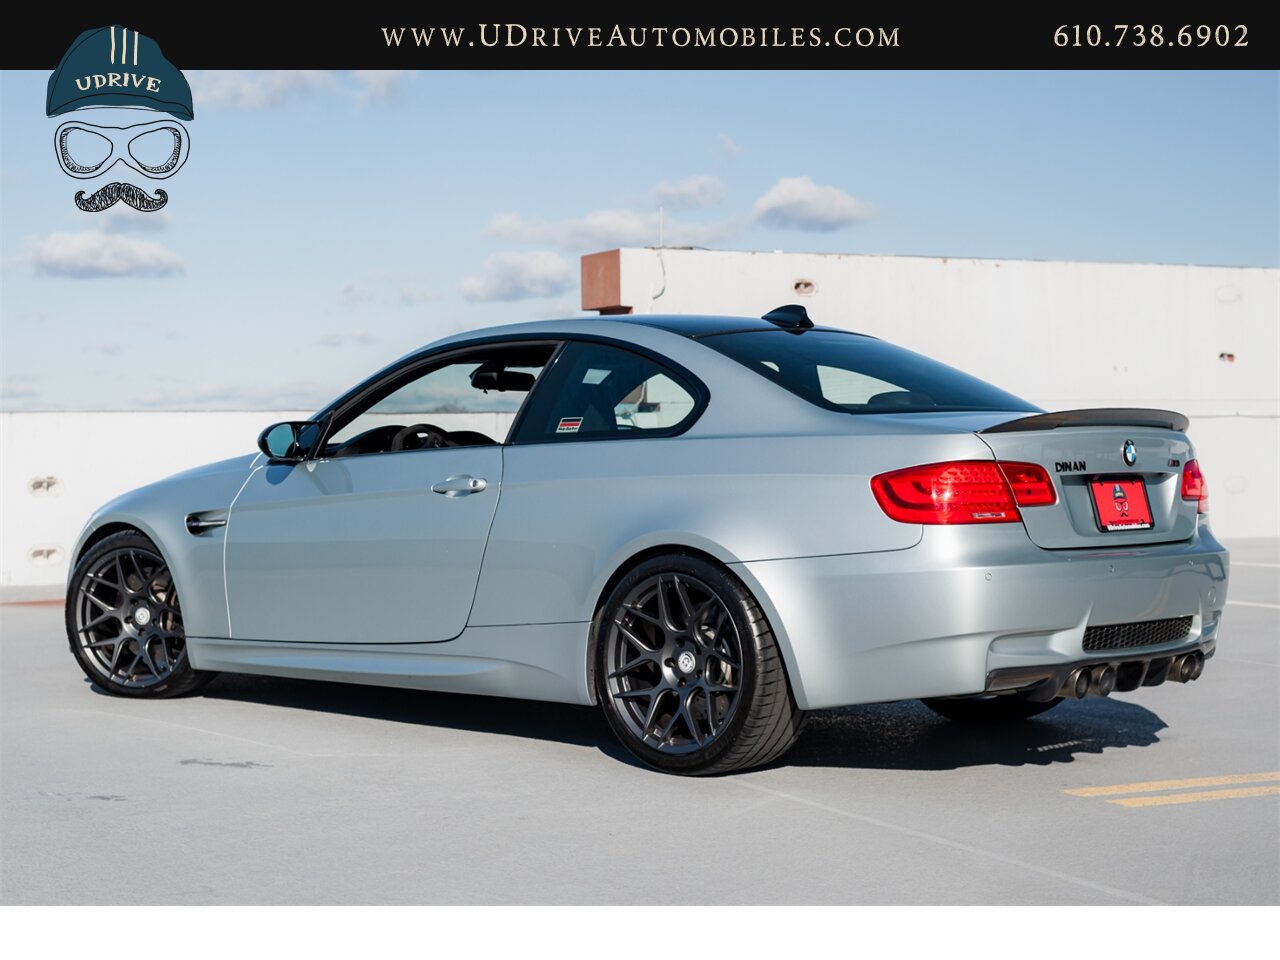 2008 BMW M3 Dinan S3-R M3 1 of 36 Produced DCT  1 Owner Full Service History 4.6L Stroker V8 - Photo 5 - West Chester, PA 19382